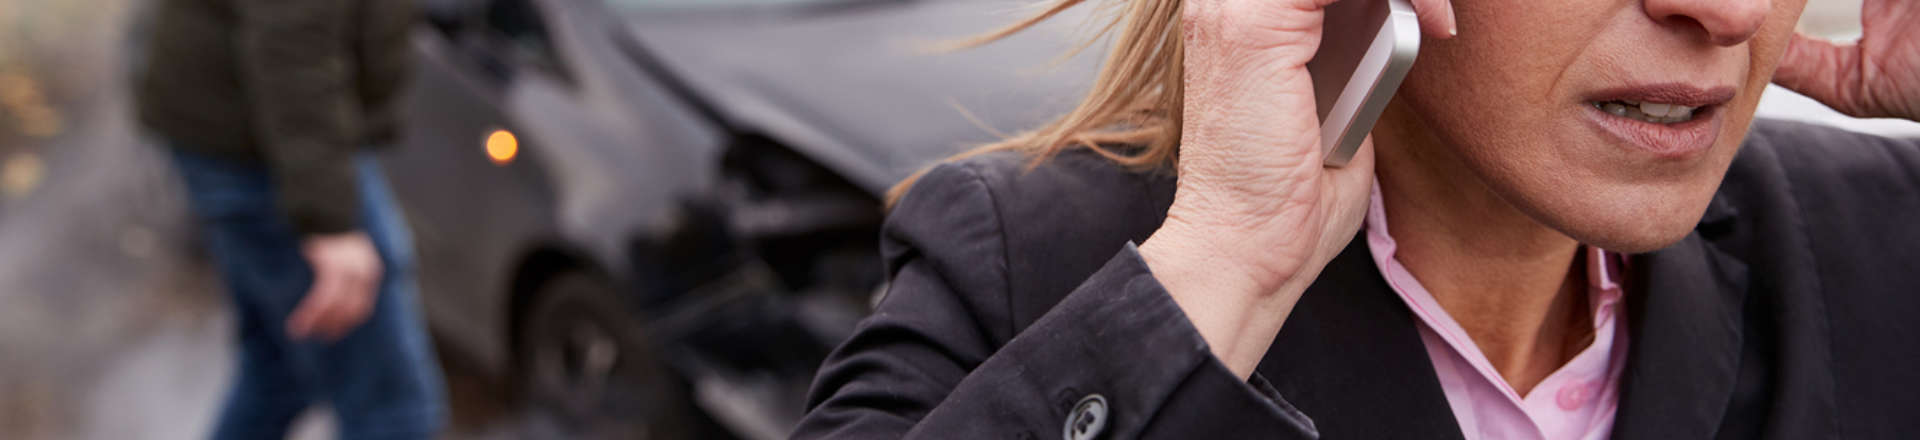 woman calling an attorney after a car accident